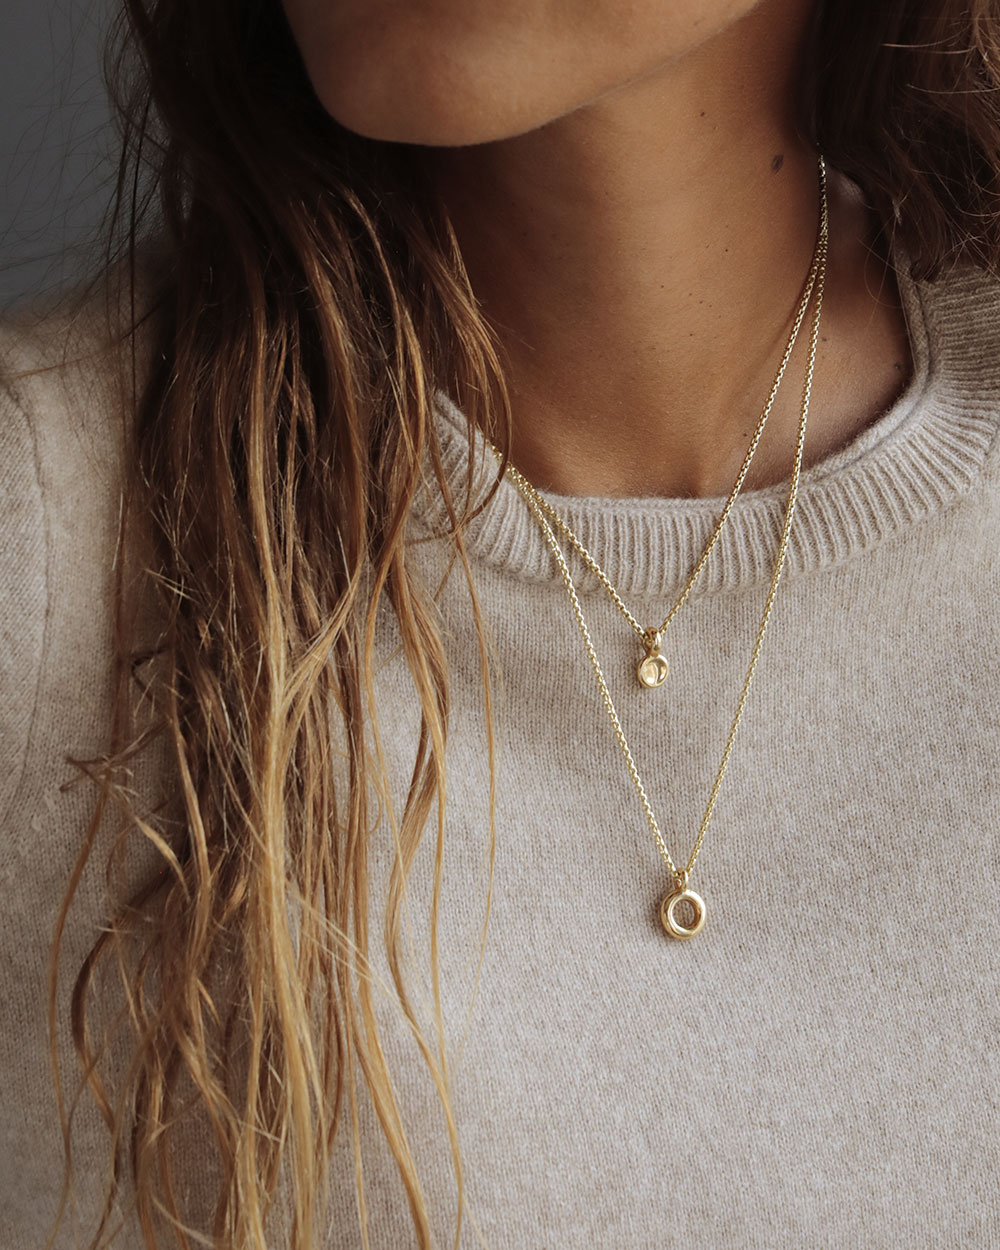 Solid 18k yellow gold donut pendant hanging on a 14k gold box chain layered with the Button pendant. Soft and heavy.